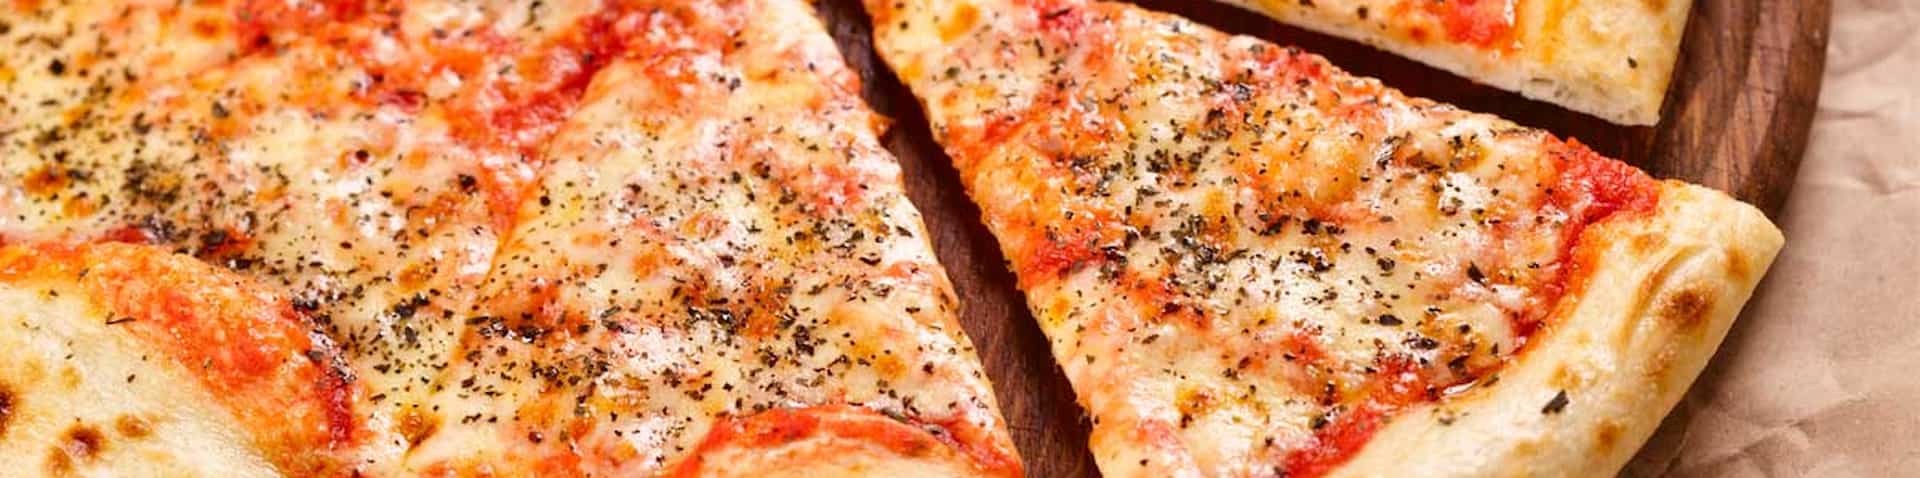 picture of pizza on pizza board